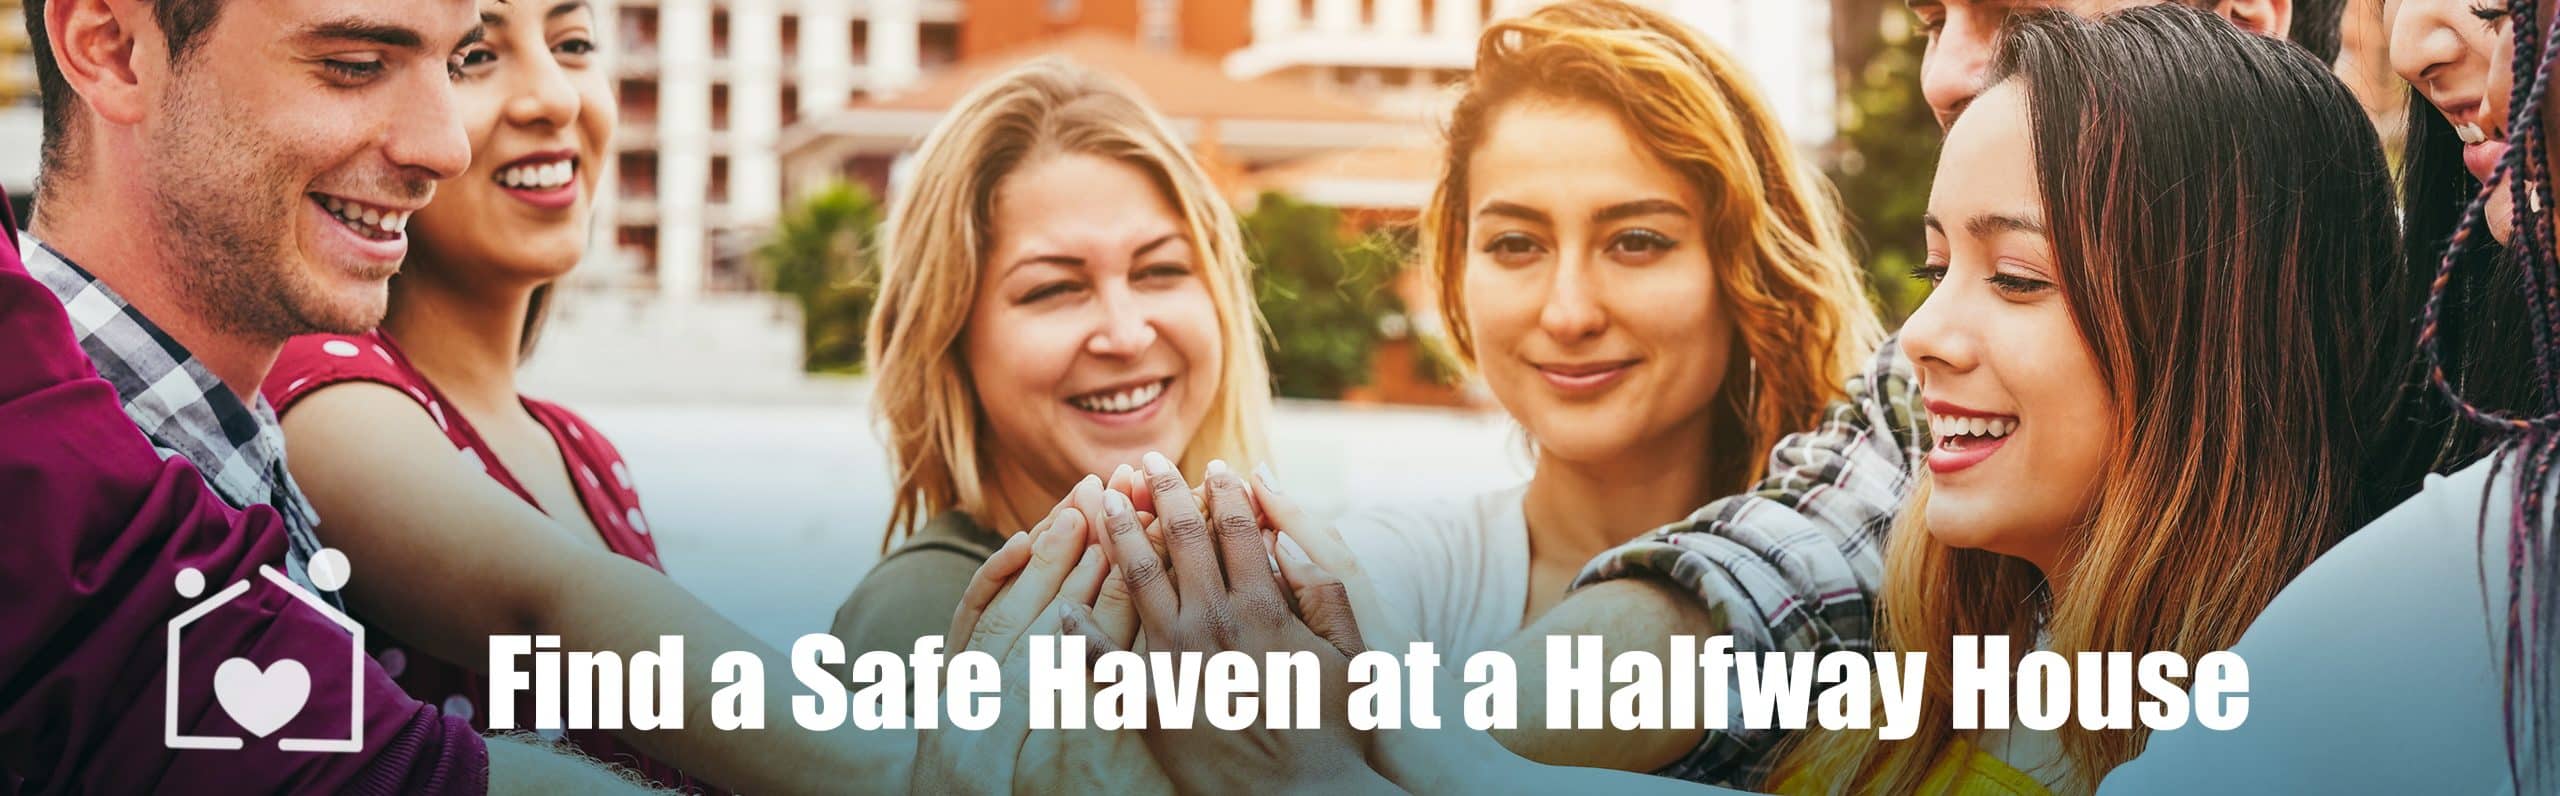 Find a Safe Haven at a Halfway House